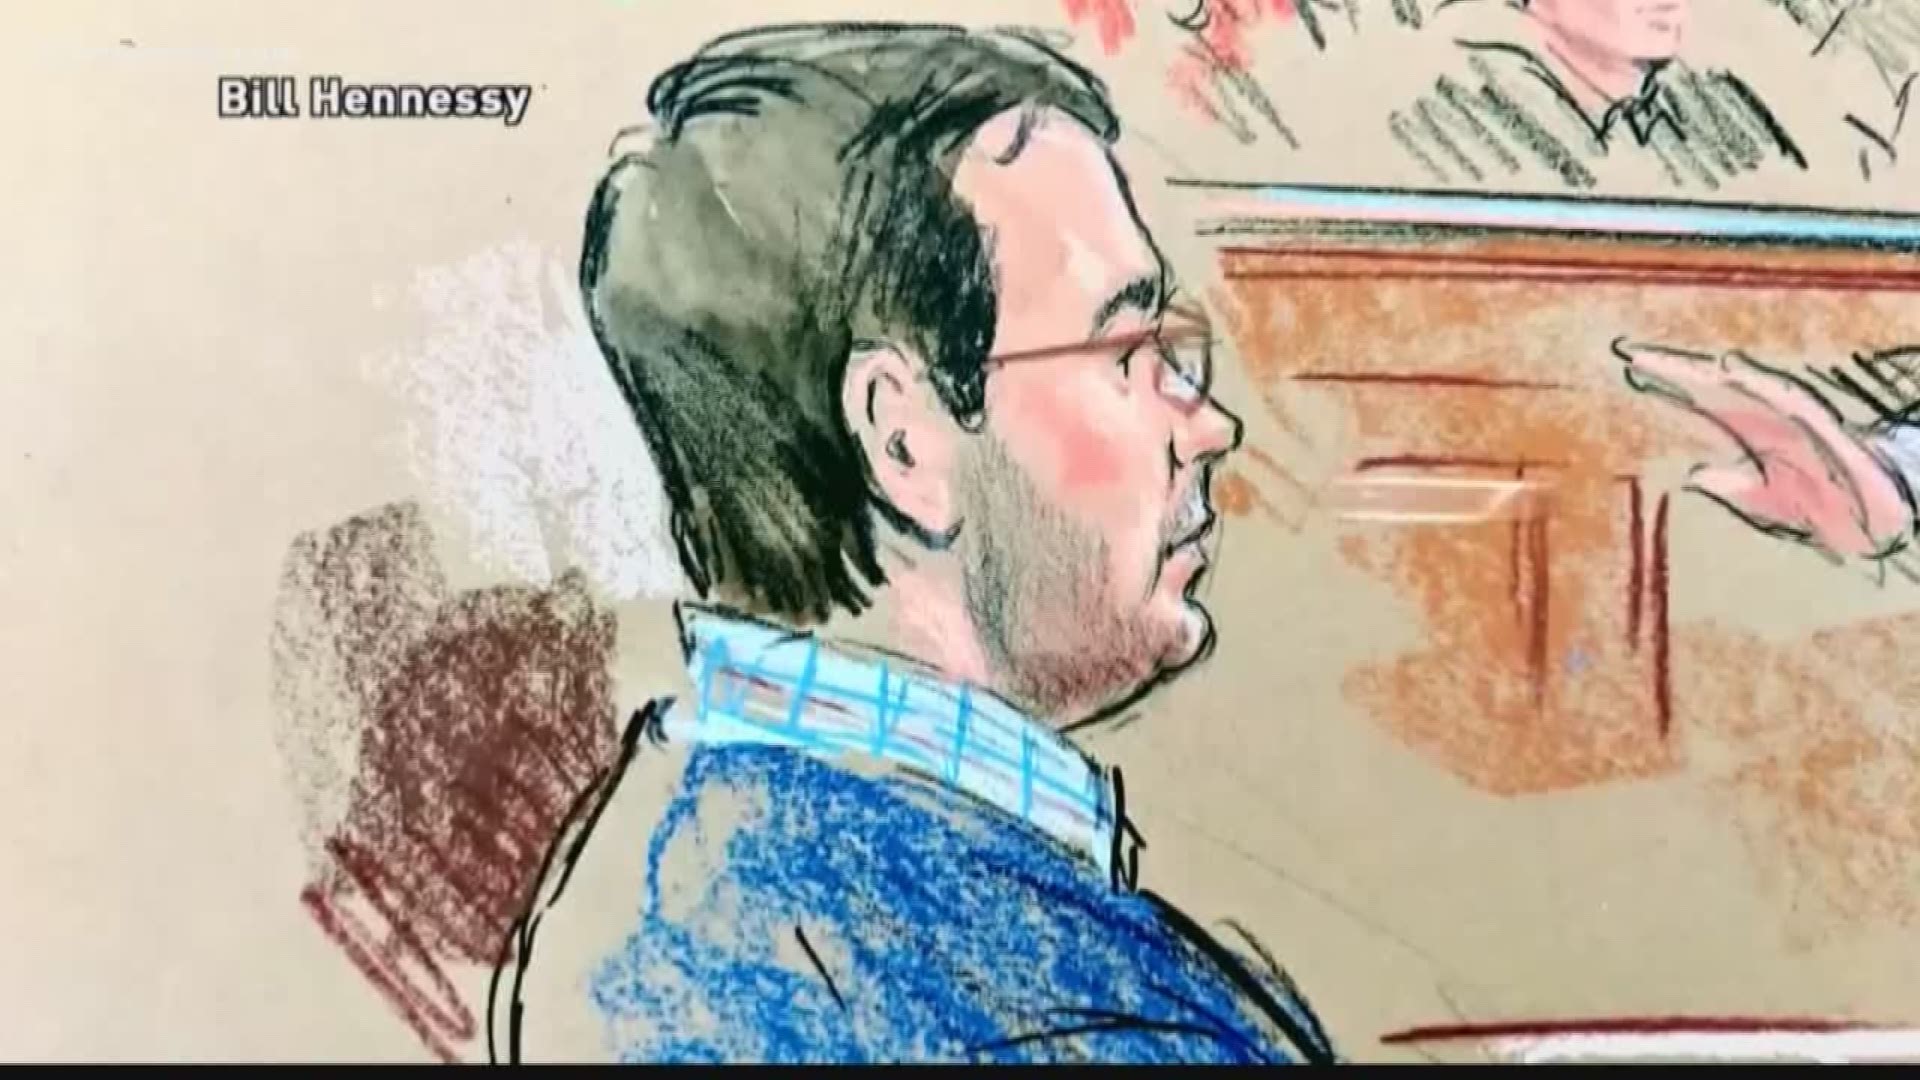 James Alex Fields Jr. is expected to be sentenced today. He was convicted of first-degree murder for killing a woman after driving his car into a crowd of counter-protesters at a white nationalist rally.